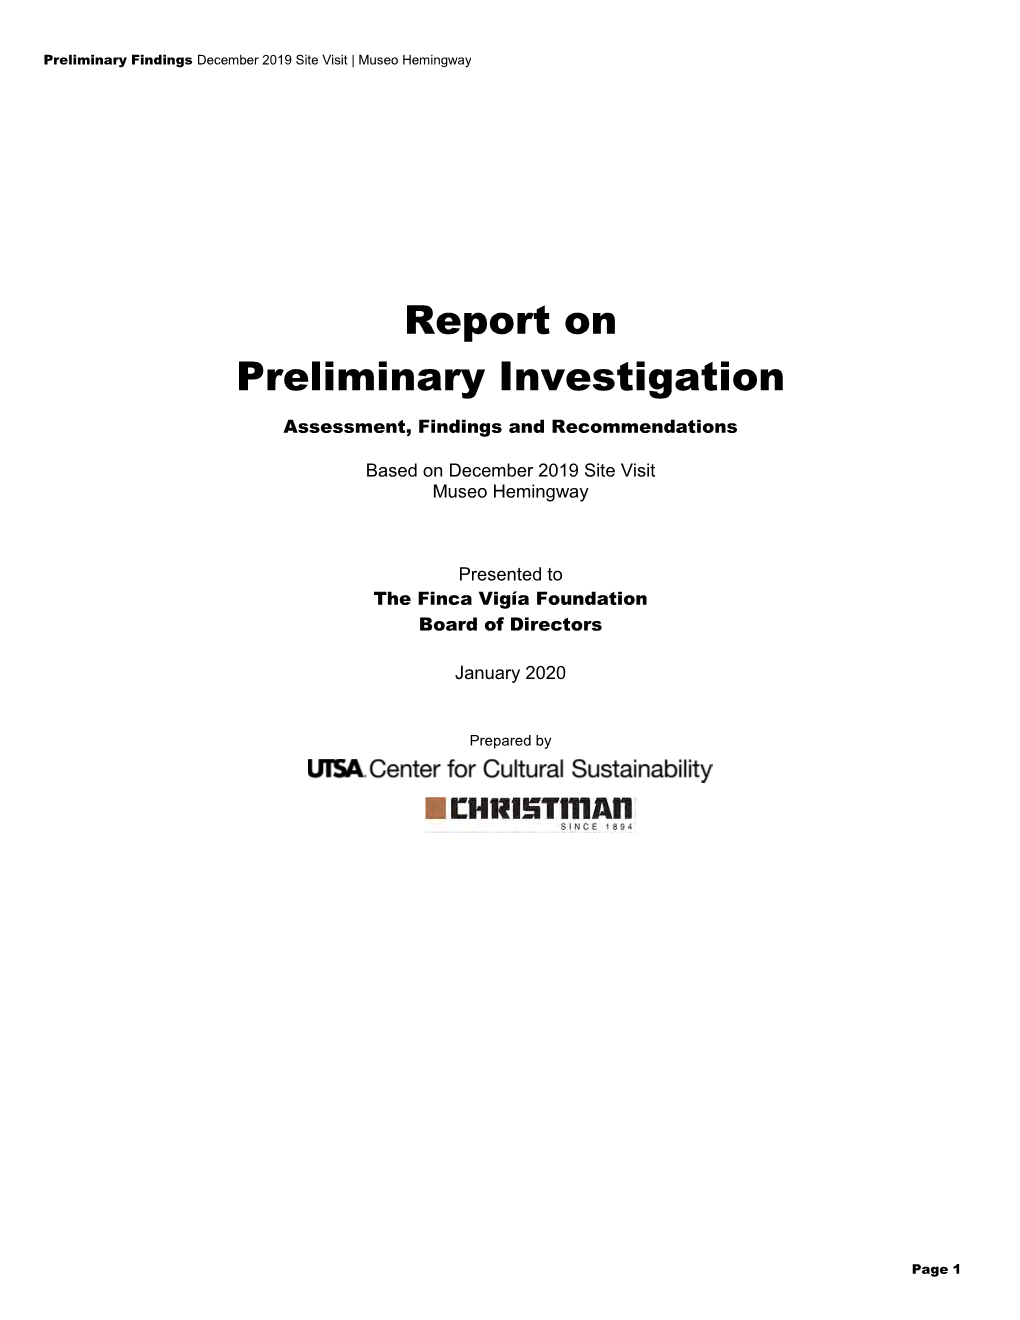 Report on Preliminary Investigation Assessment, Findings and Recommendations